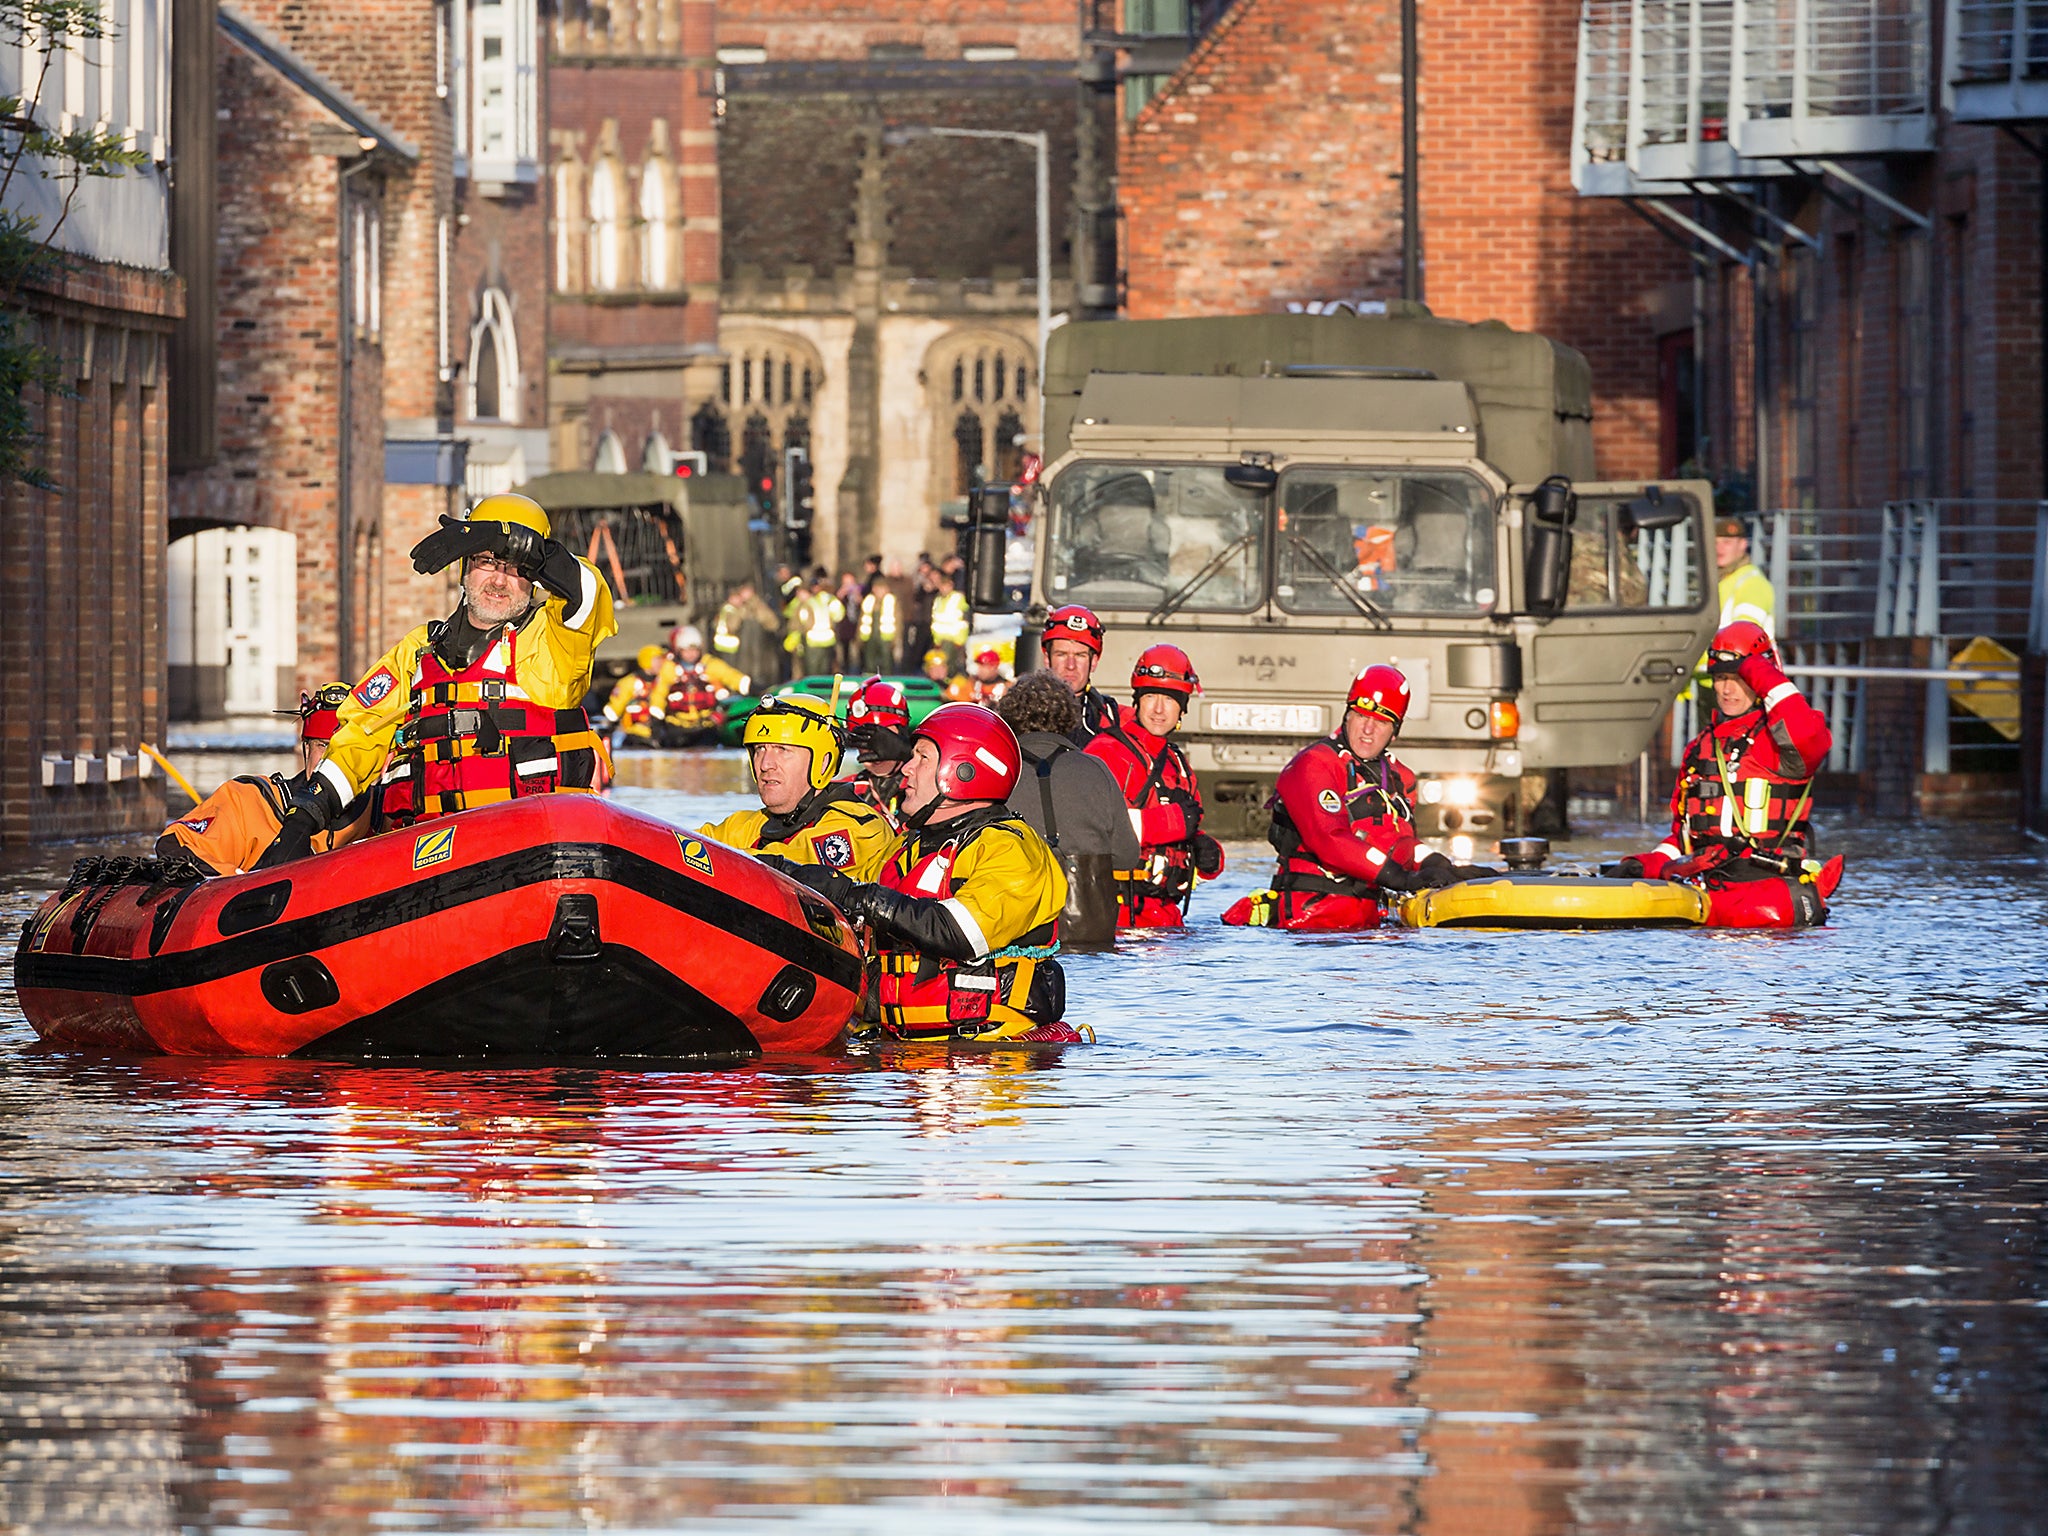 In 2015, the city of York was flooded after heavy rain which became the worst it had suffered in a generation, where the River Ouse was 5.2m above its normal level (Shuttercock)